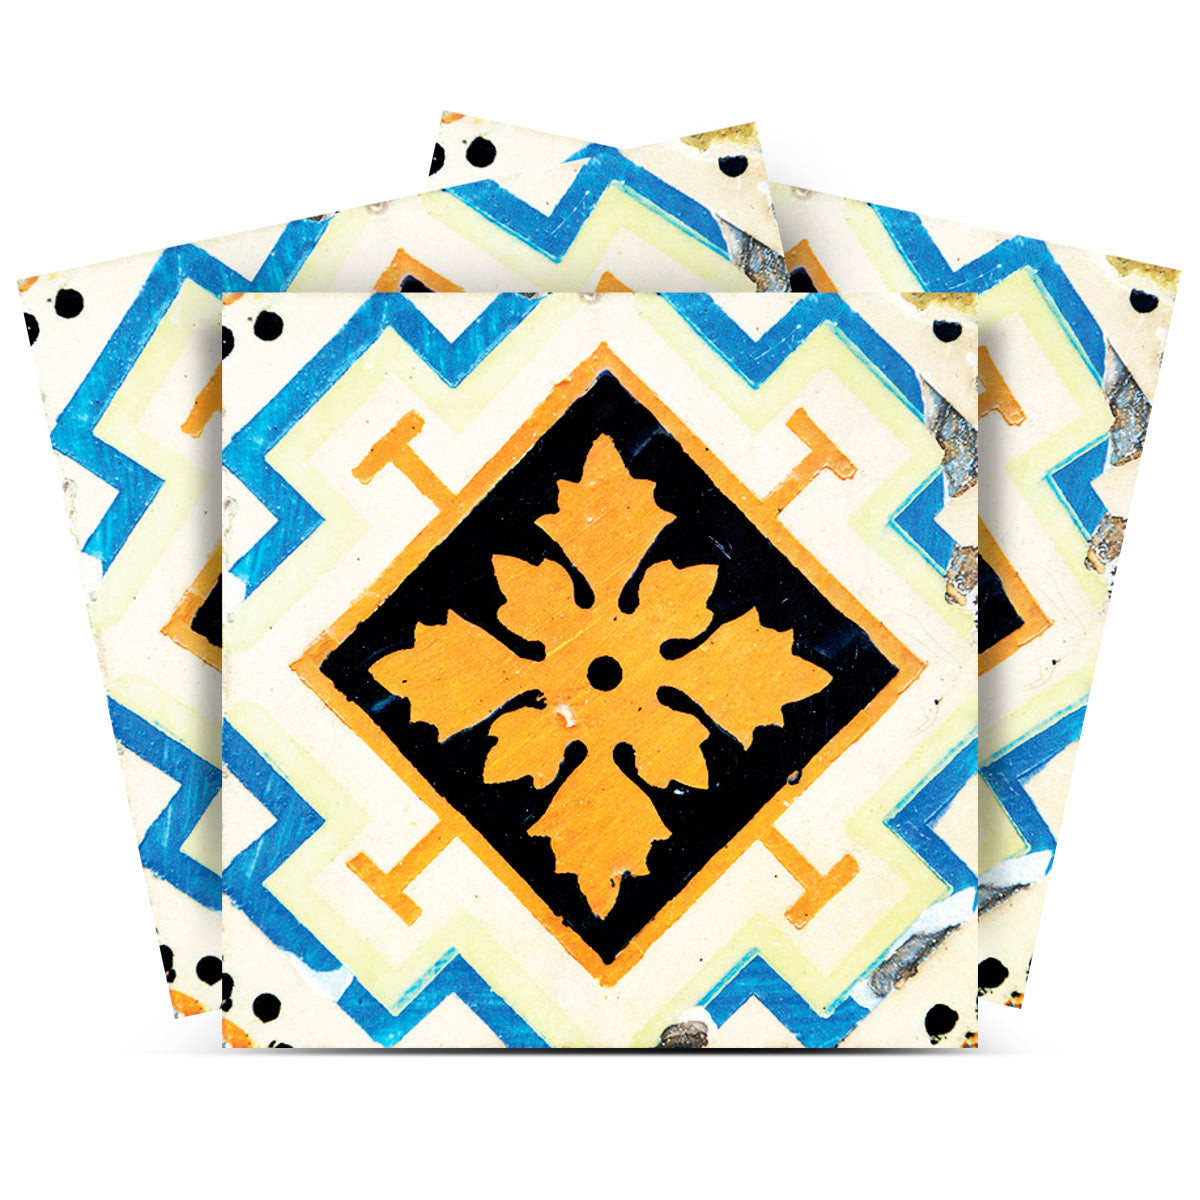 6" x 6" Gold Snowflake Peel and Stick Removable Tiles-400486-1